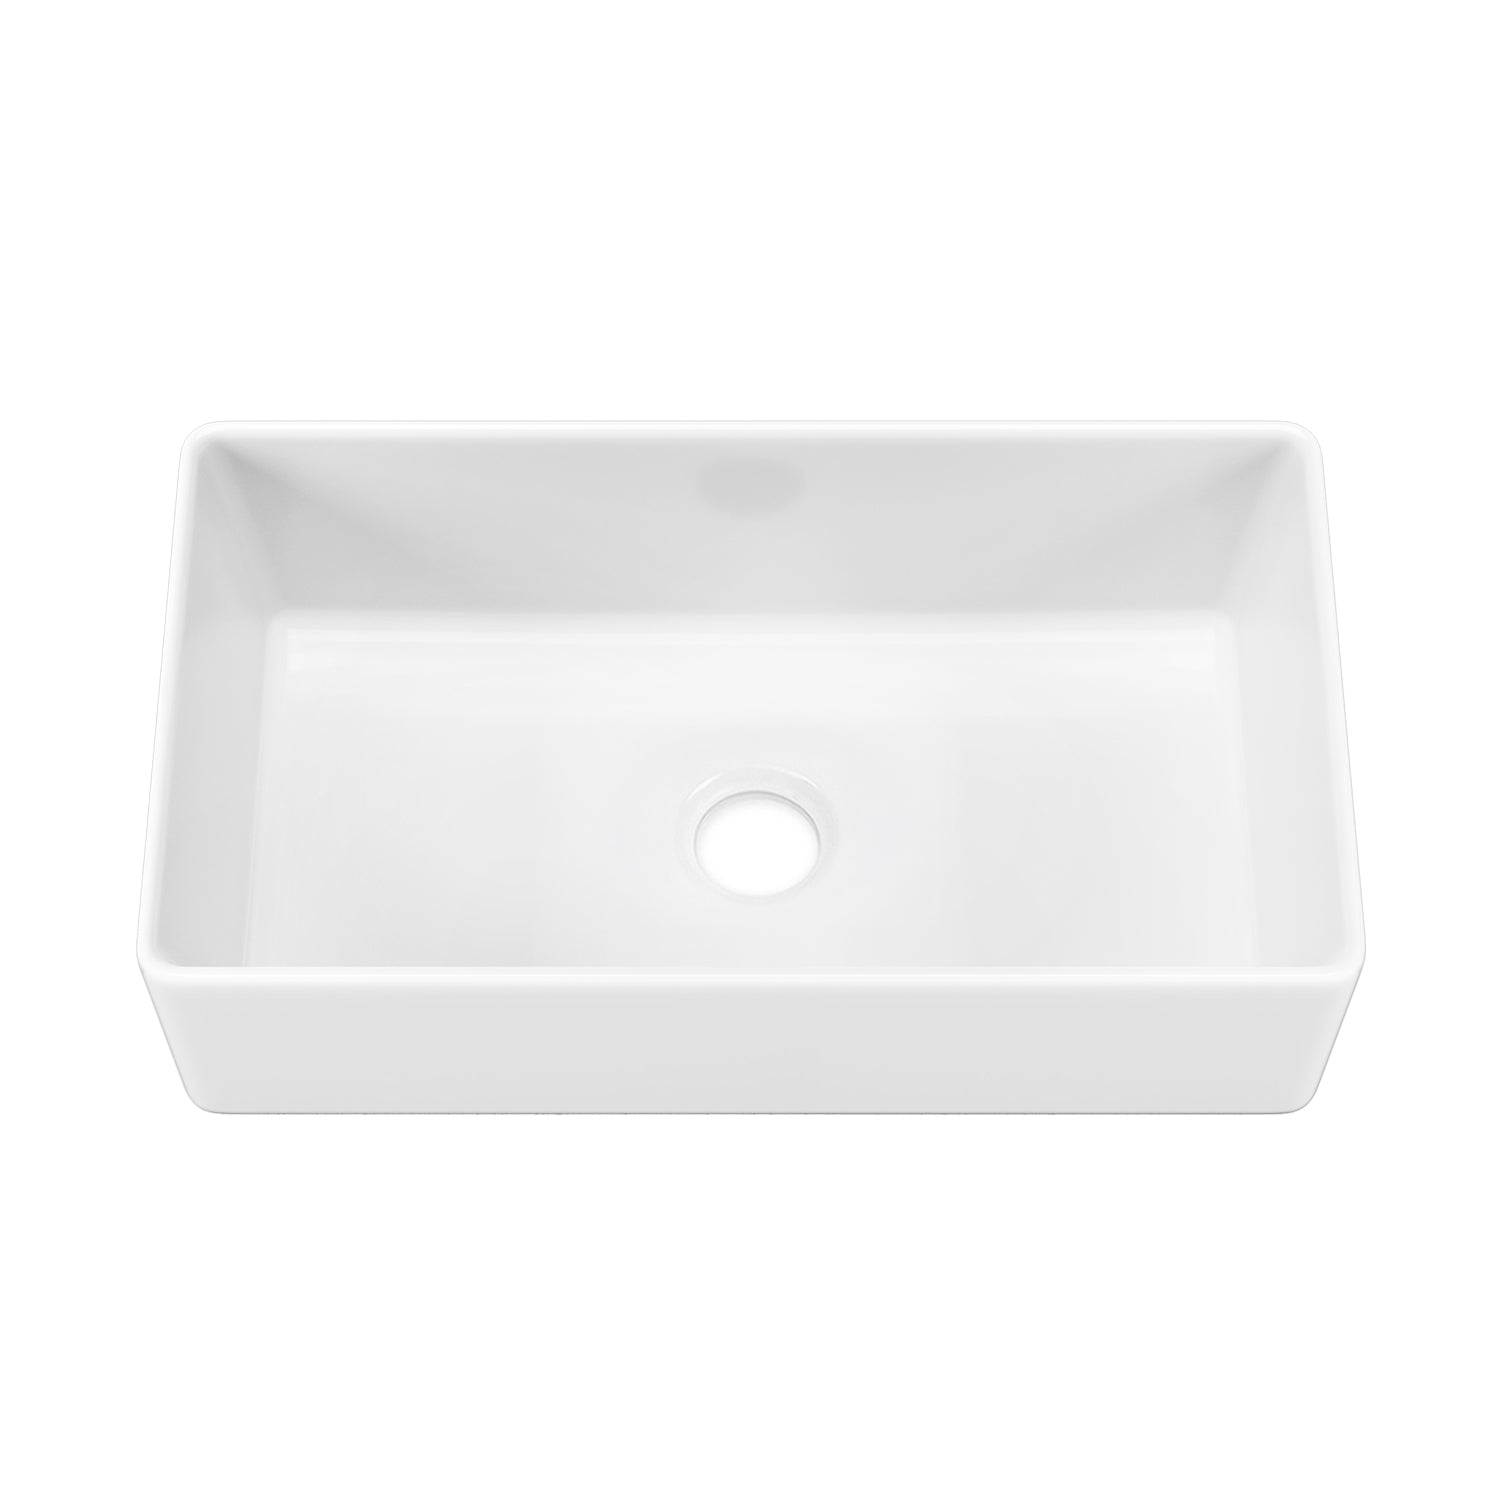 Sinber 33 Inch Farmhouse Apron Single Bowl Kitchen Sink with Fireclay White Finish 2 Accessories F3318S-OL